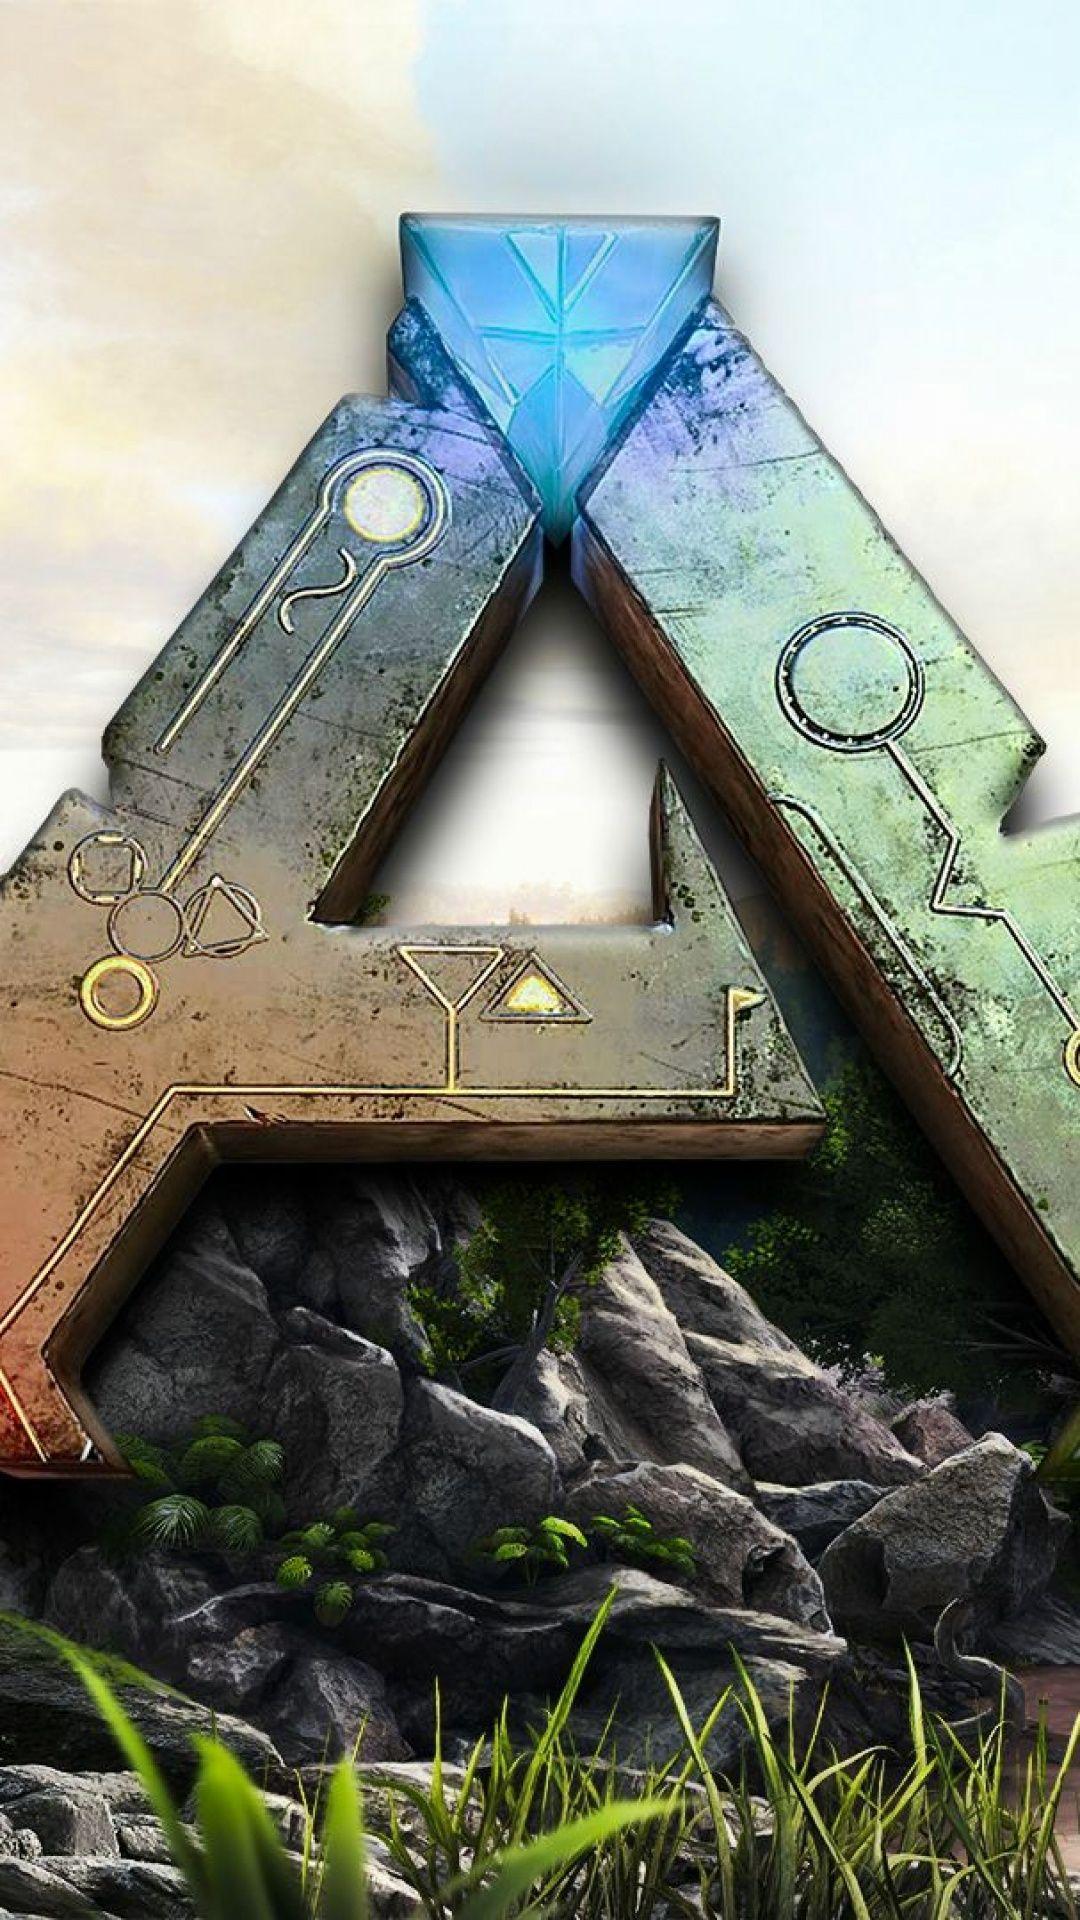 ark survival evolved community discussion